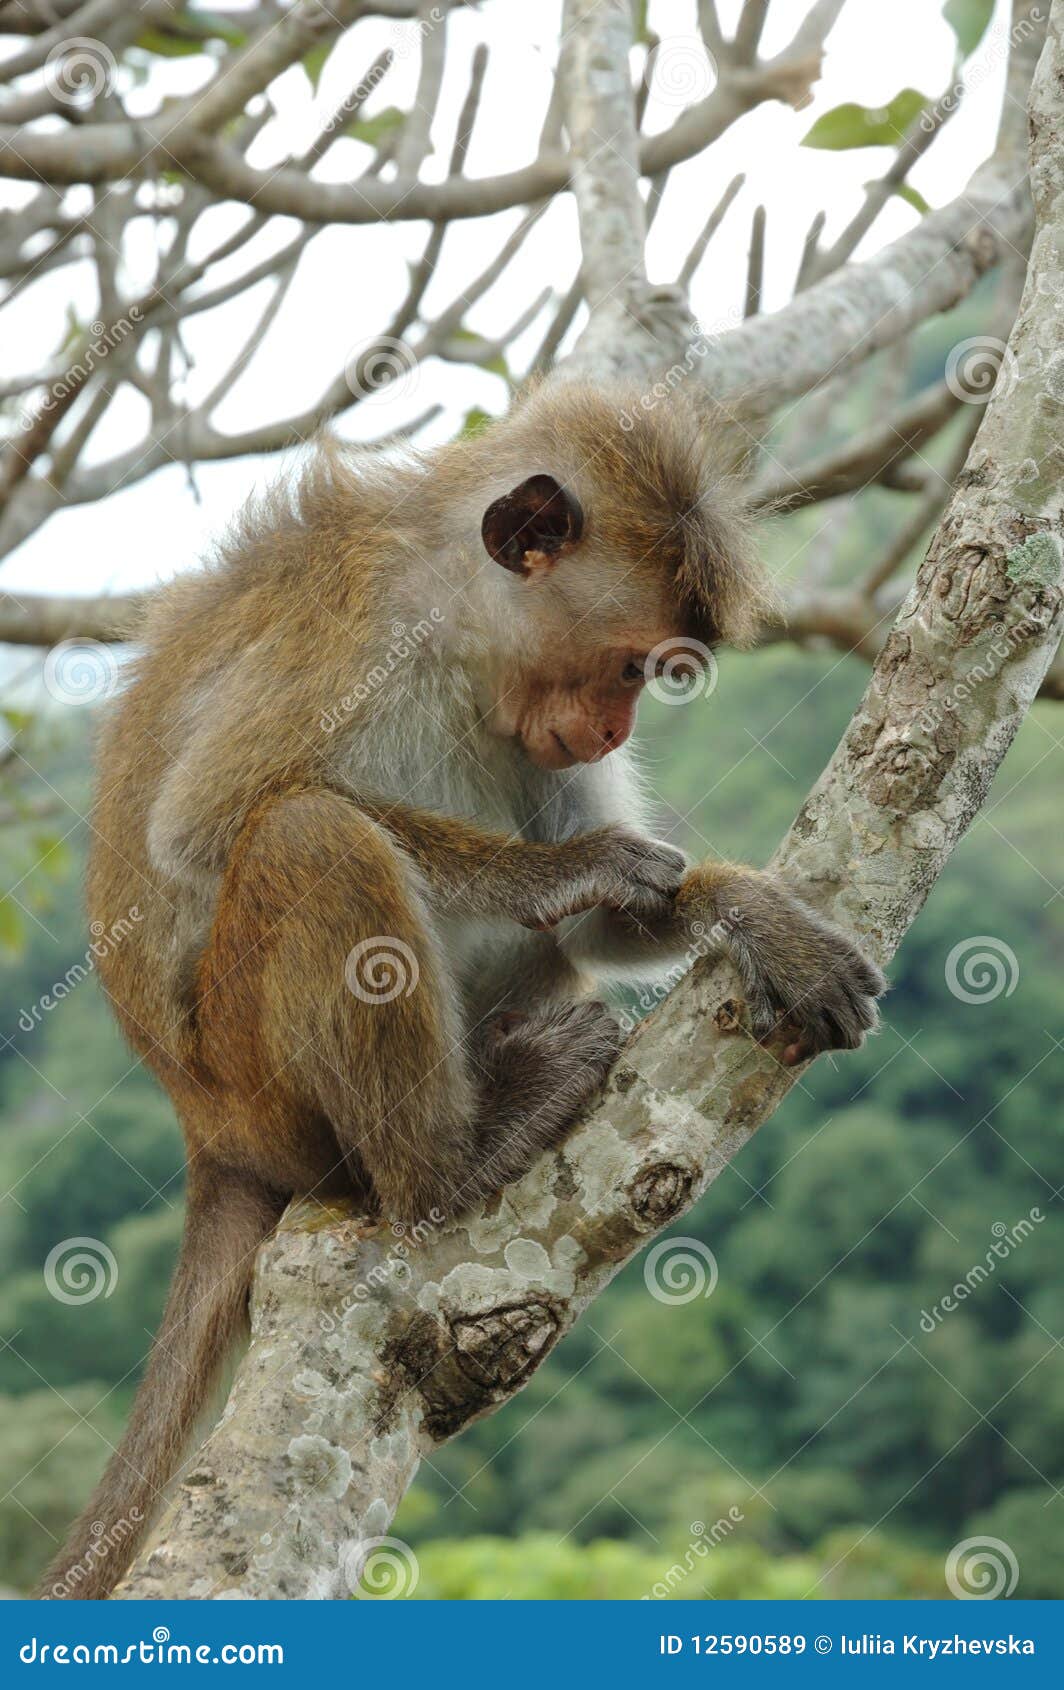 bonnet macaque (macaca radiata) in tropical forest